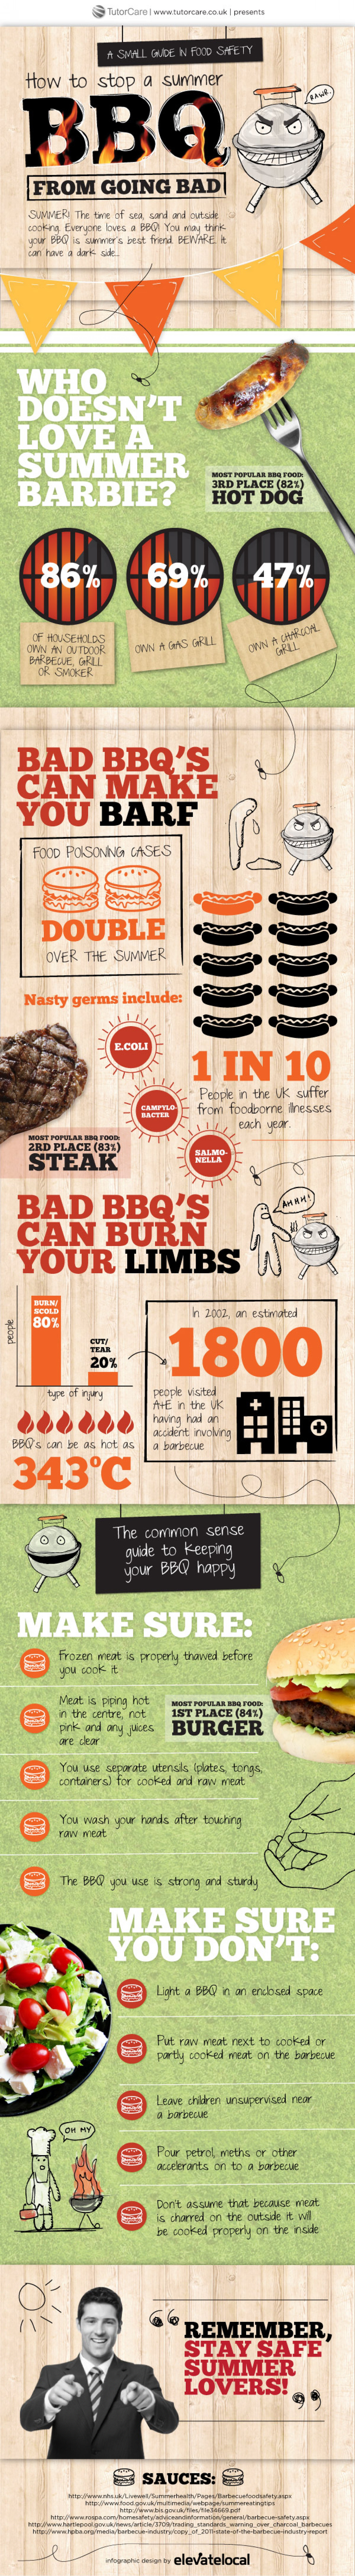 how-to-stop-a-summer-bbq-from-going-bad_50291a0e3d690_w1500